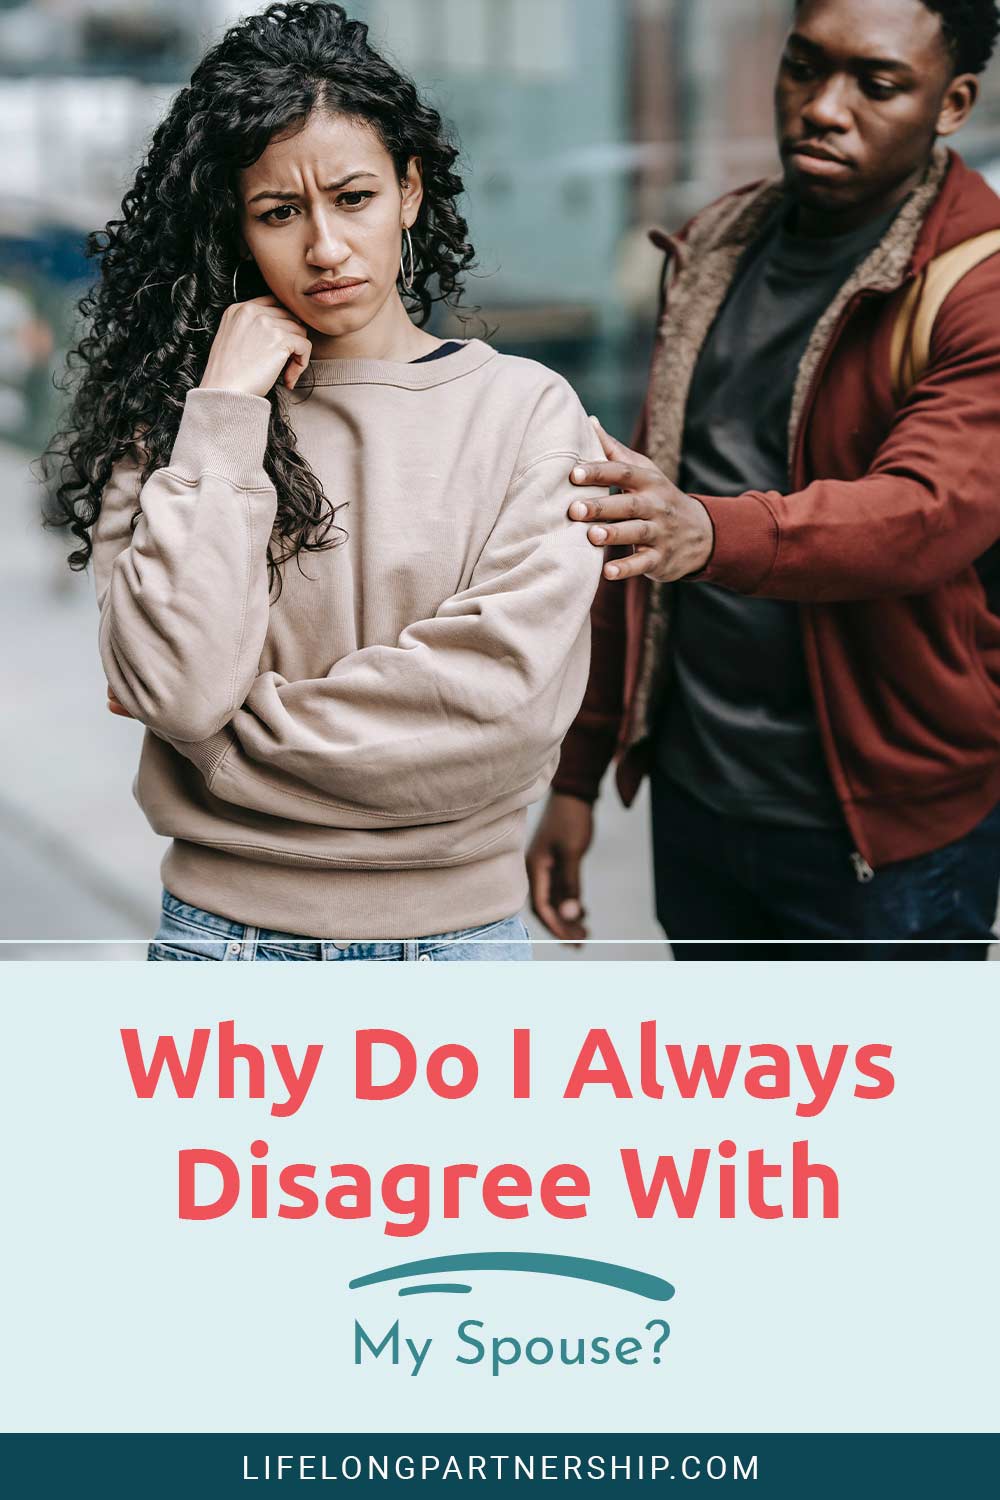 Why Do I Always Disagree With My Spouse?